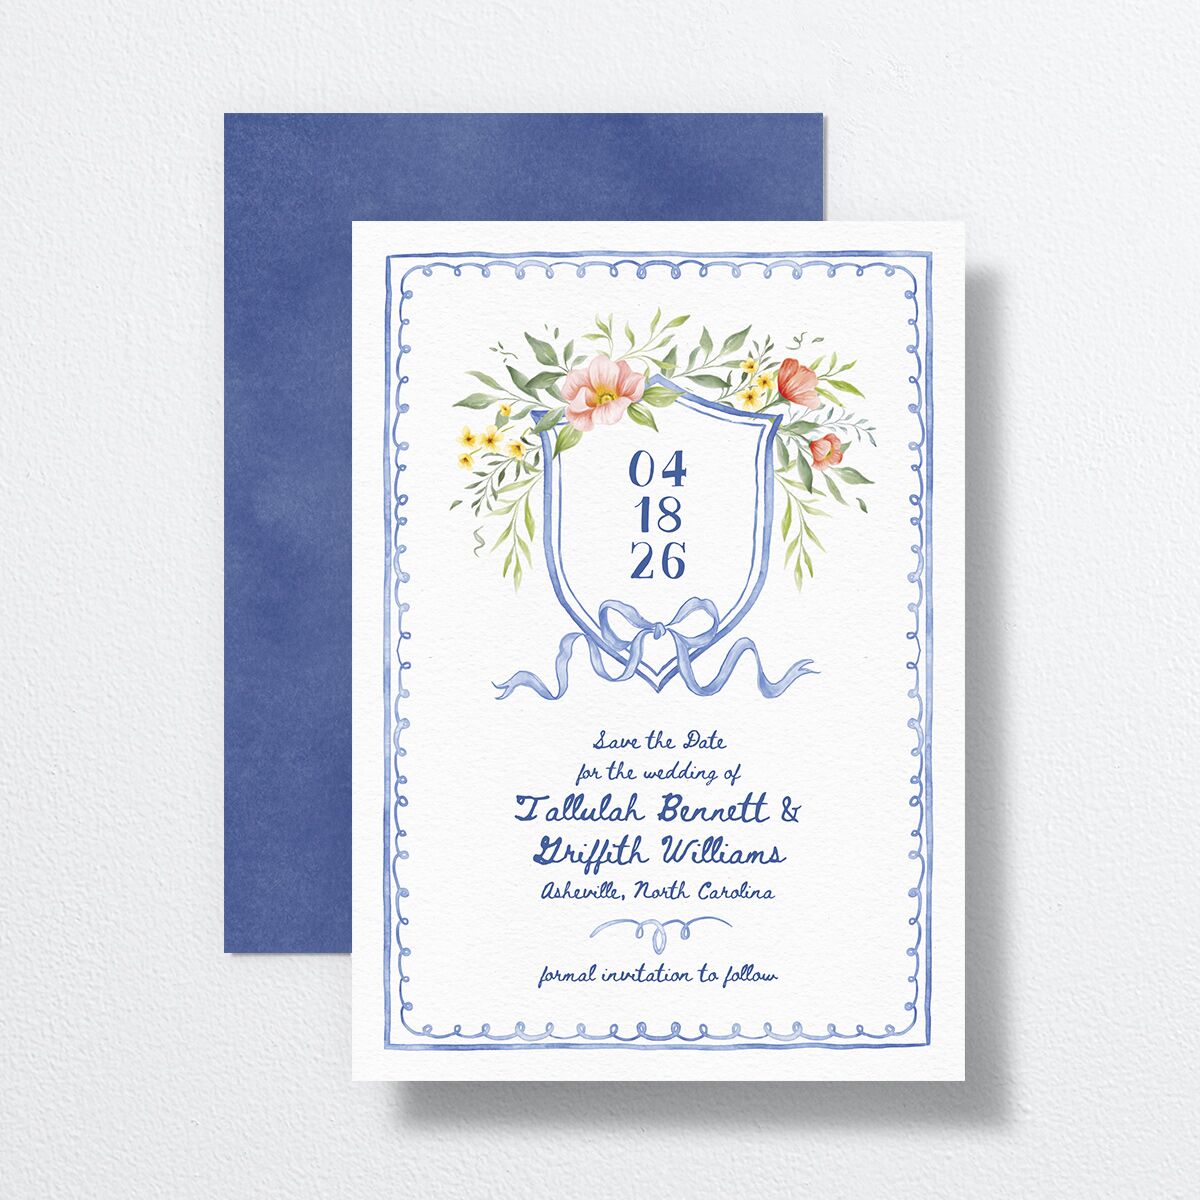 Countryside Crest Save the Date Cards front-and-back in blue